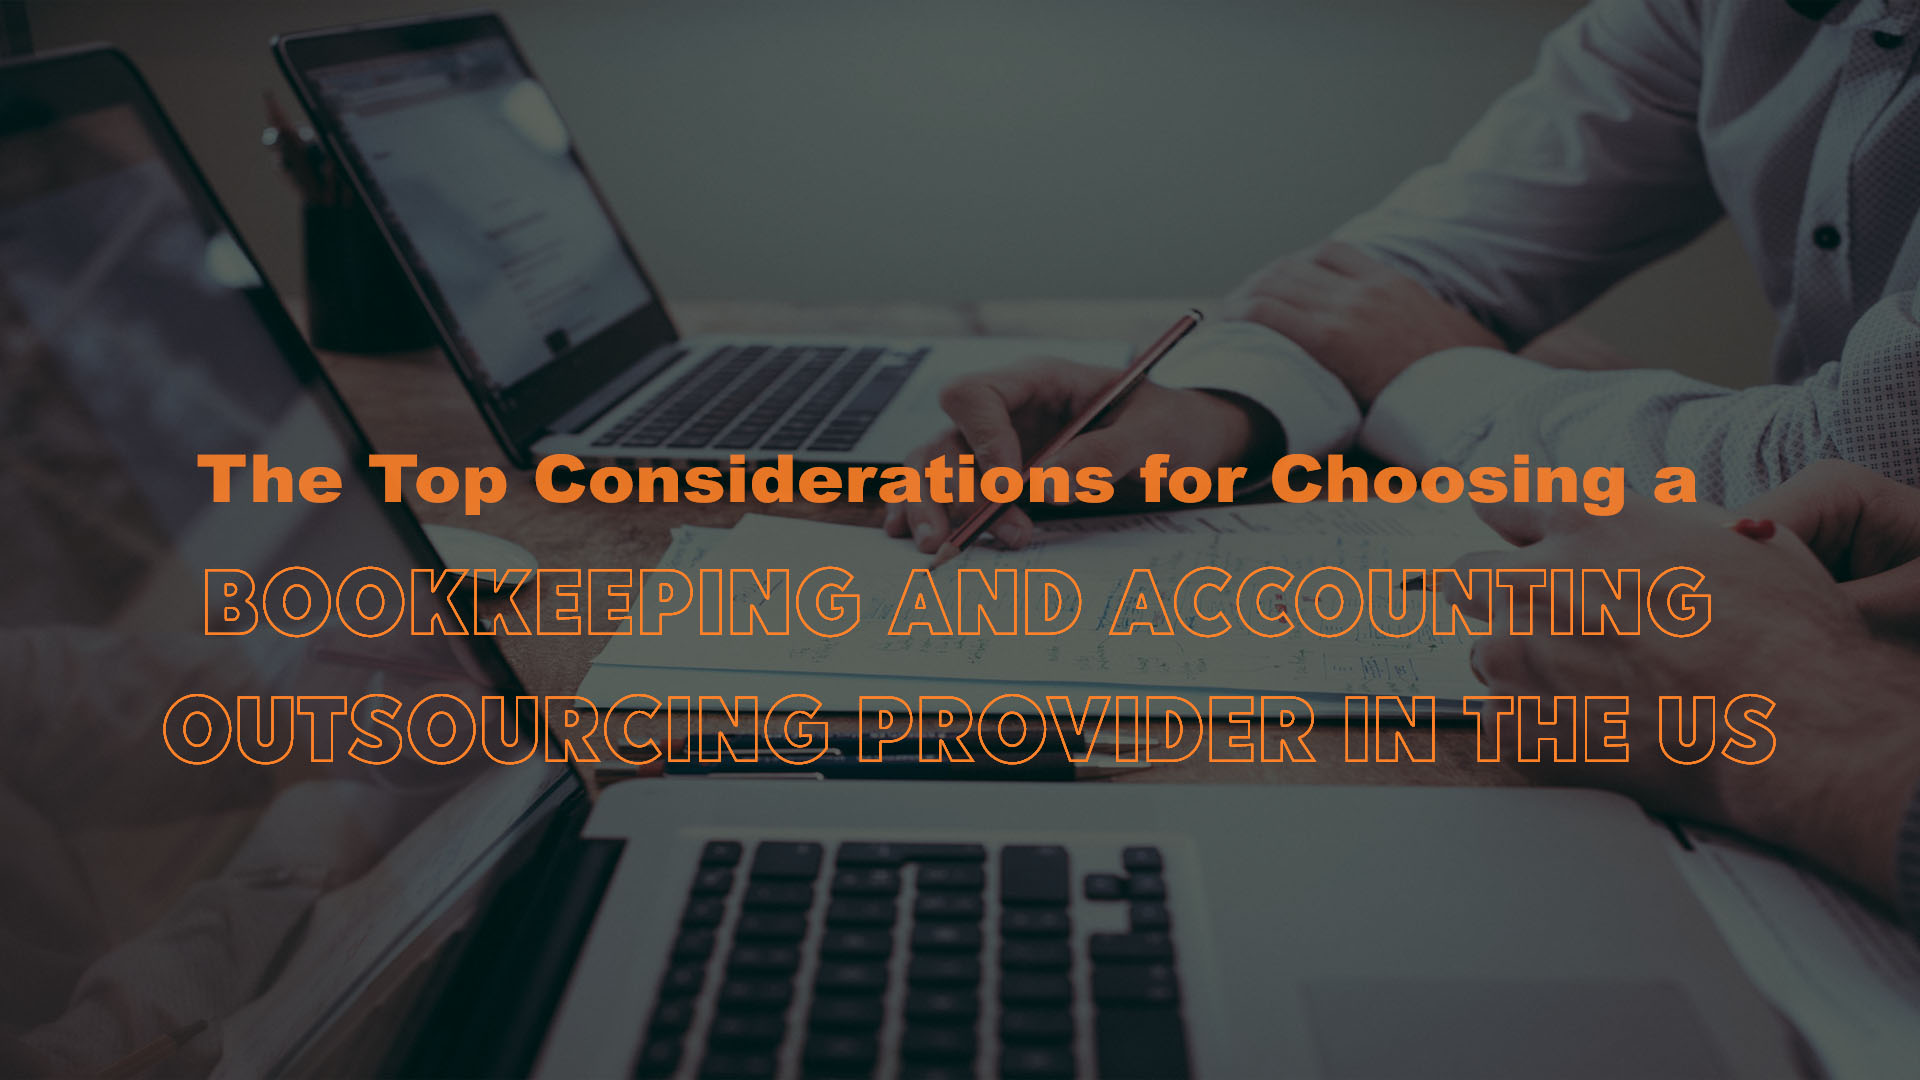 The-Top-Considerations-for-Choosing-a-Bookkeeping-and-Accounting-Outsourcing-Provider-in-the-US